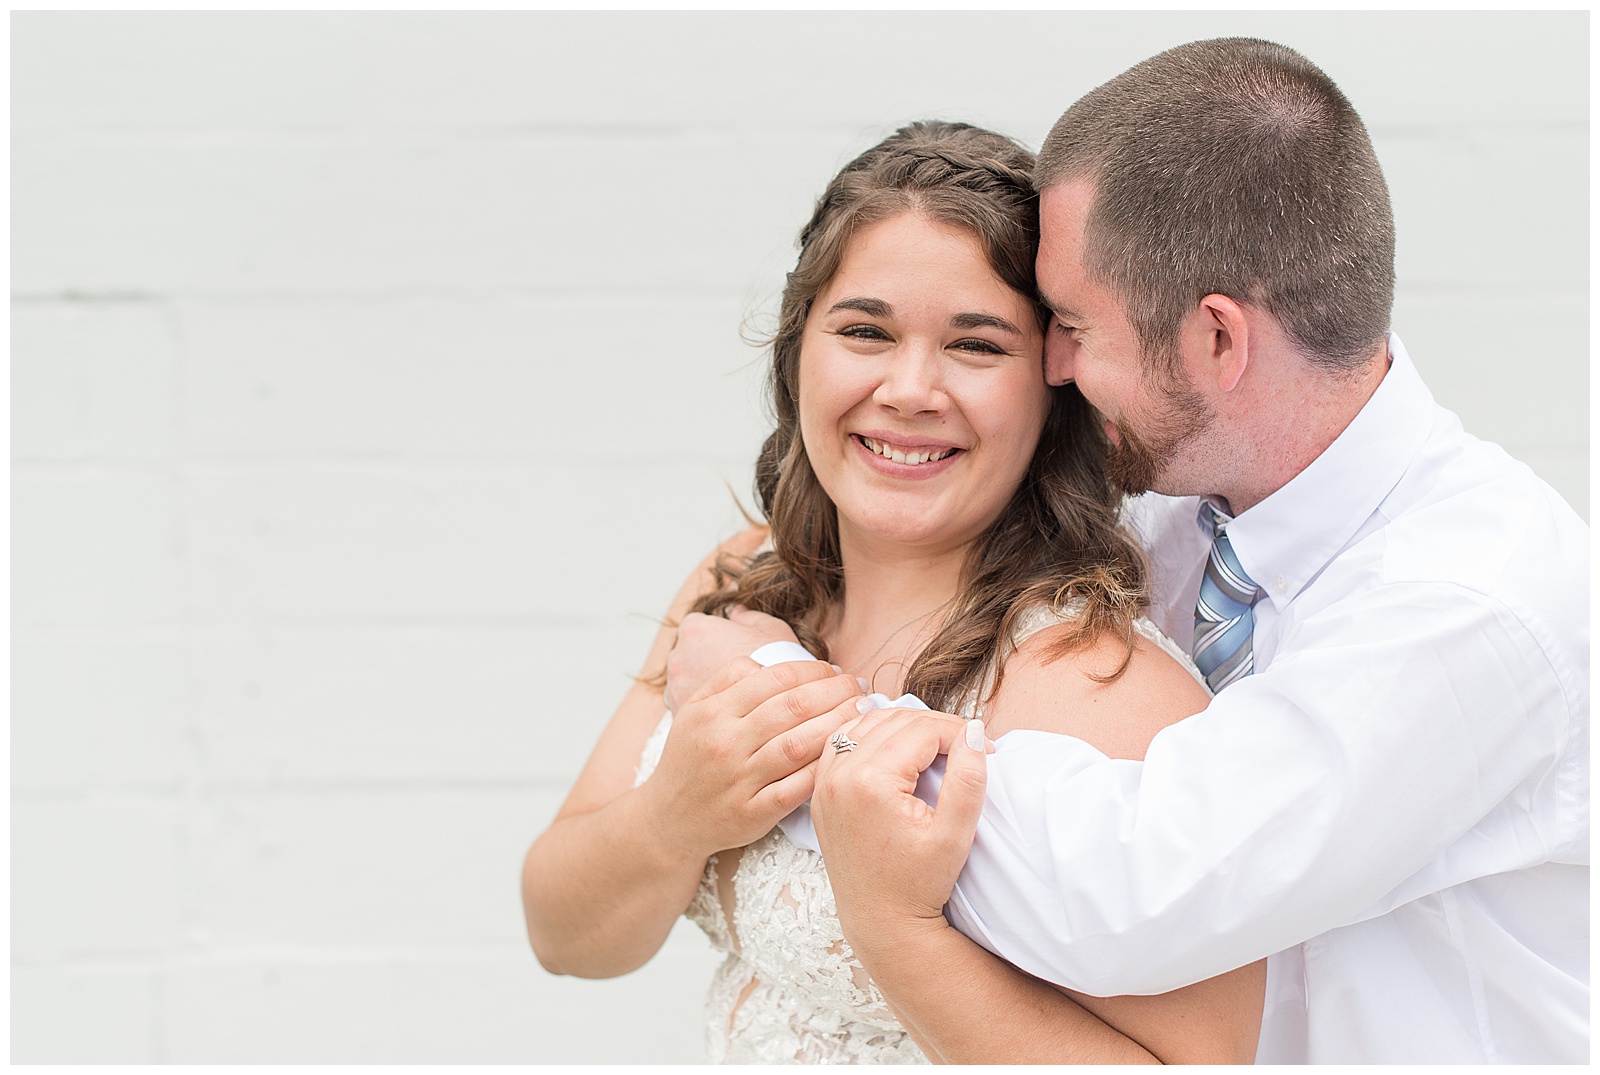 groom's arms wrapped around bride as she smiles at camera